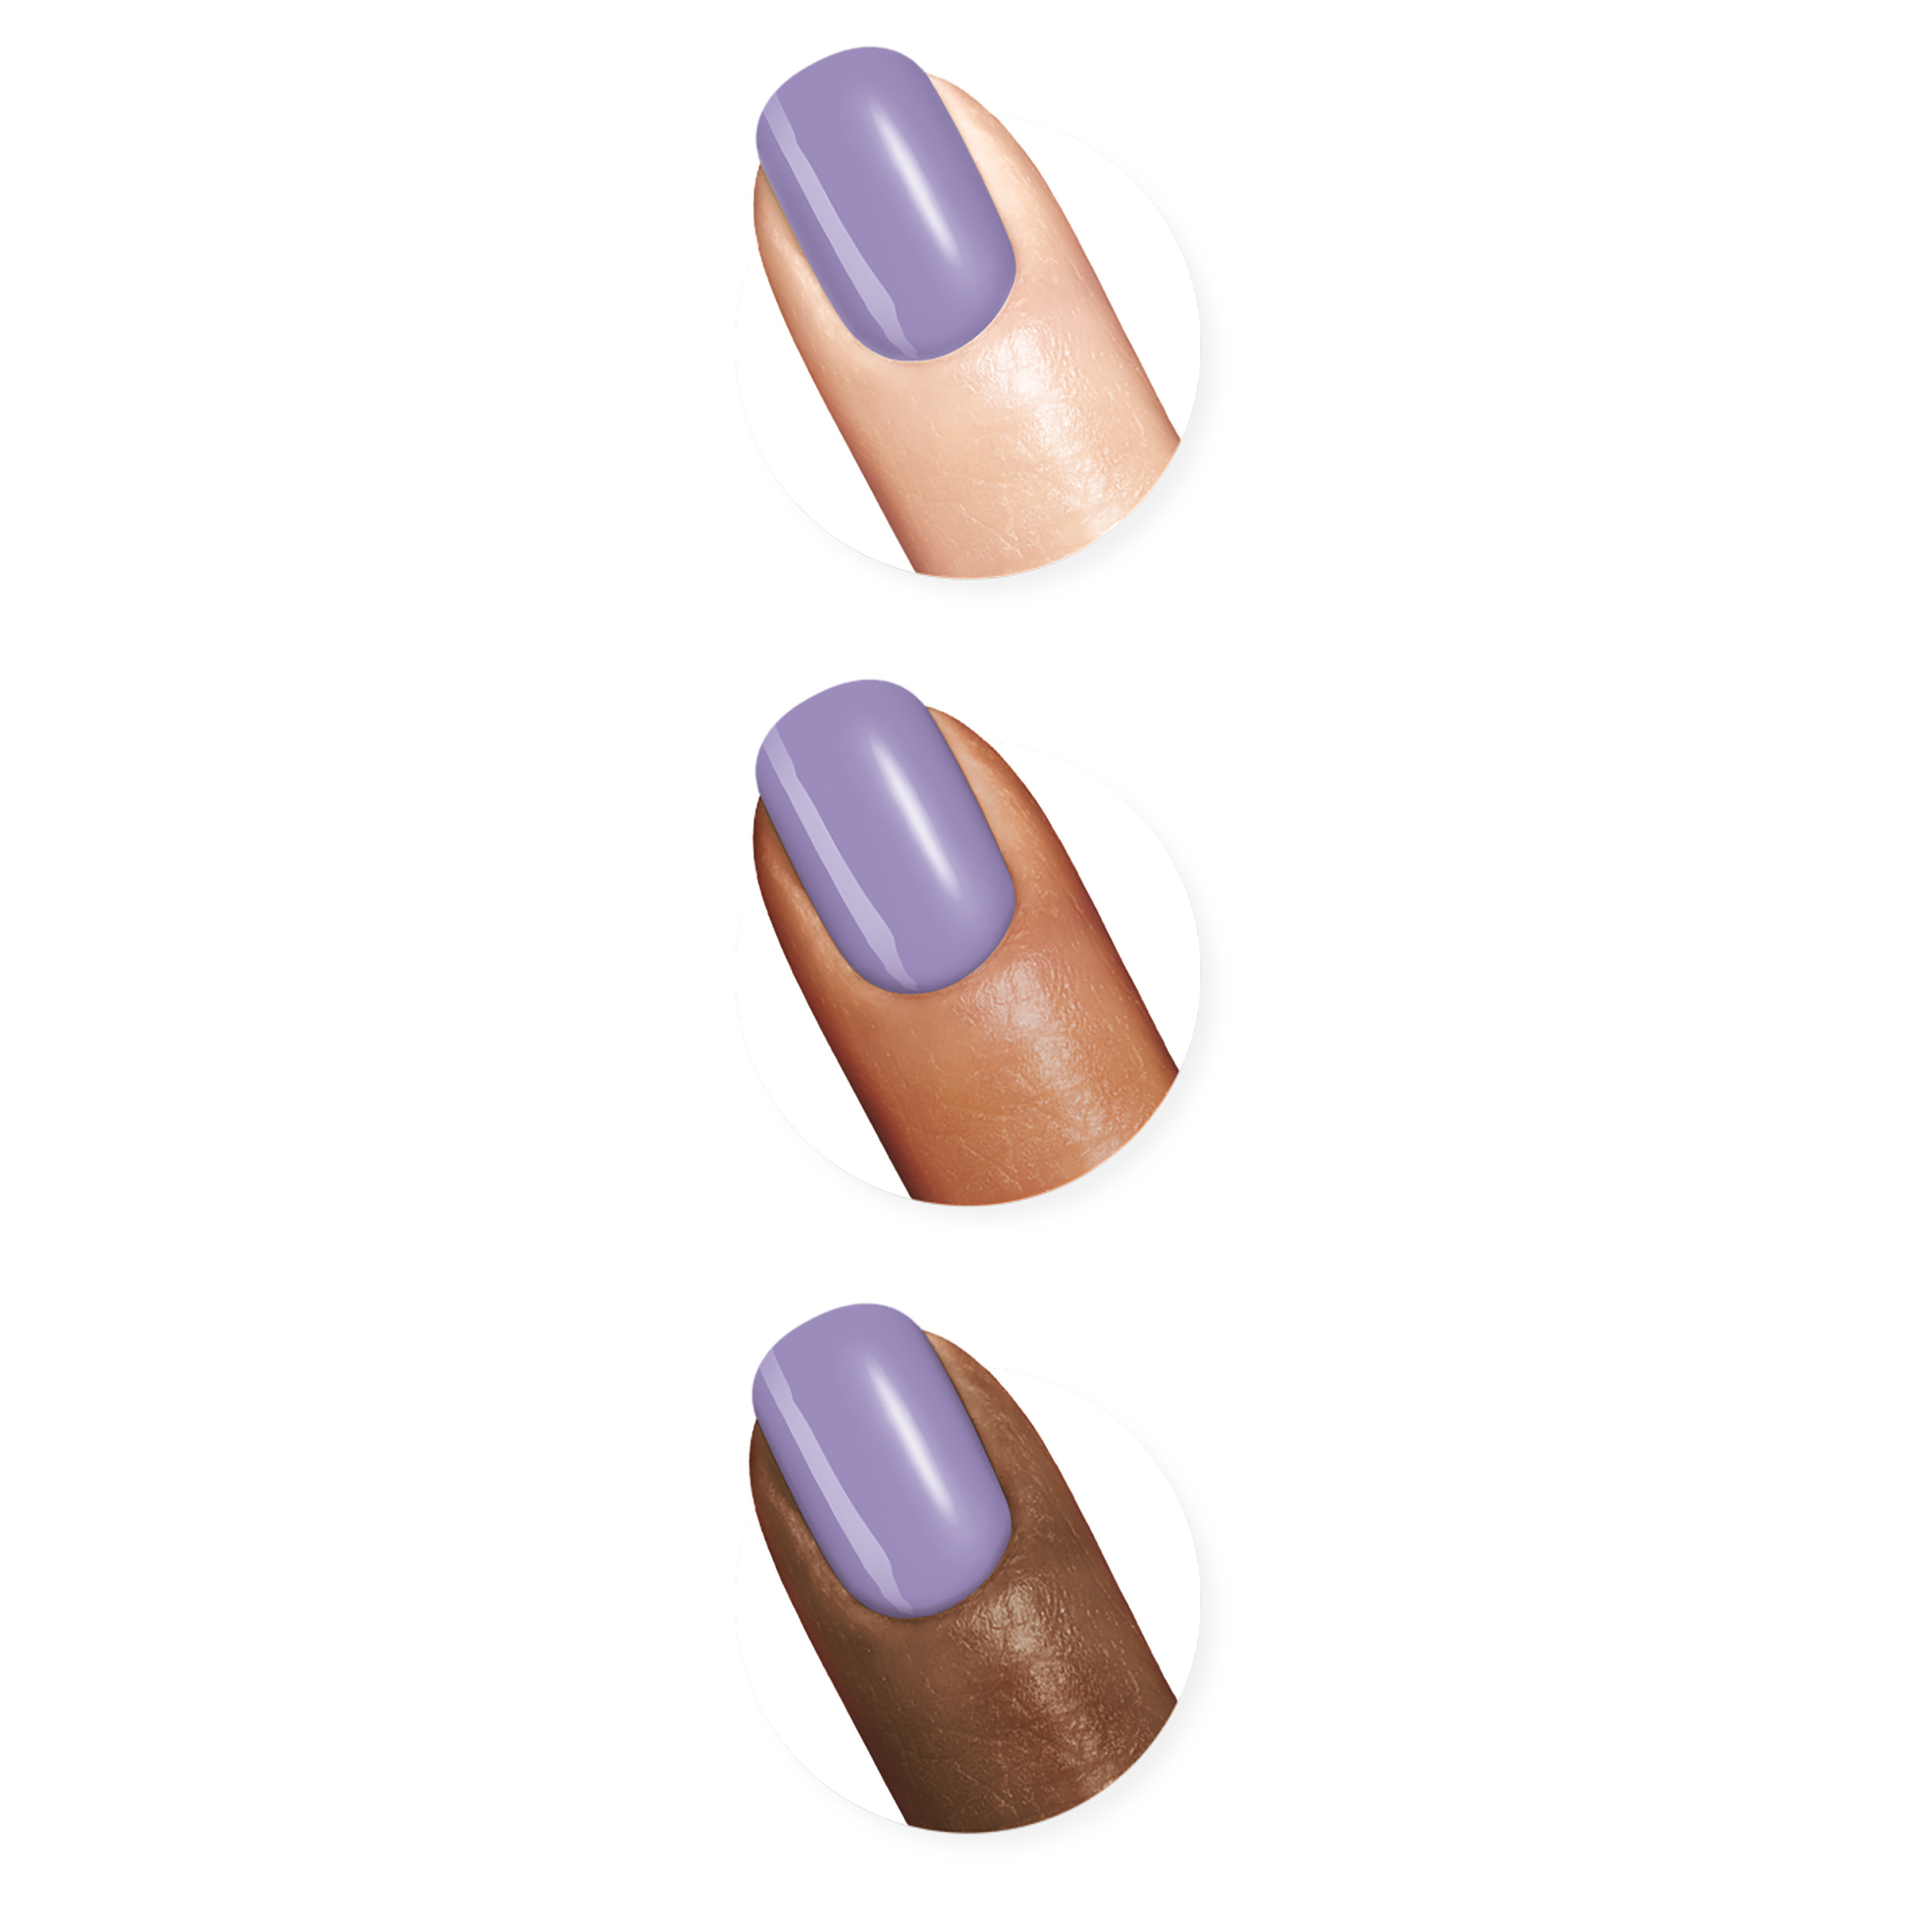 Sally Hansen Xtreme WearNail Polish, Lacey Lilac, 0.4 oz, Chip Resistant, Bold Color - image 4 of 14